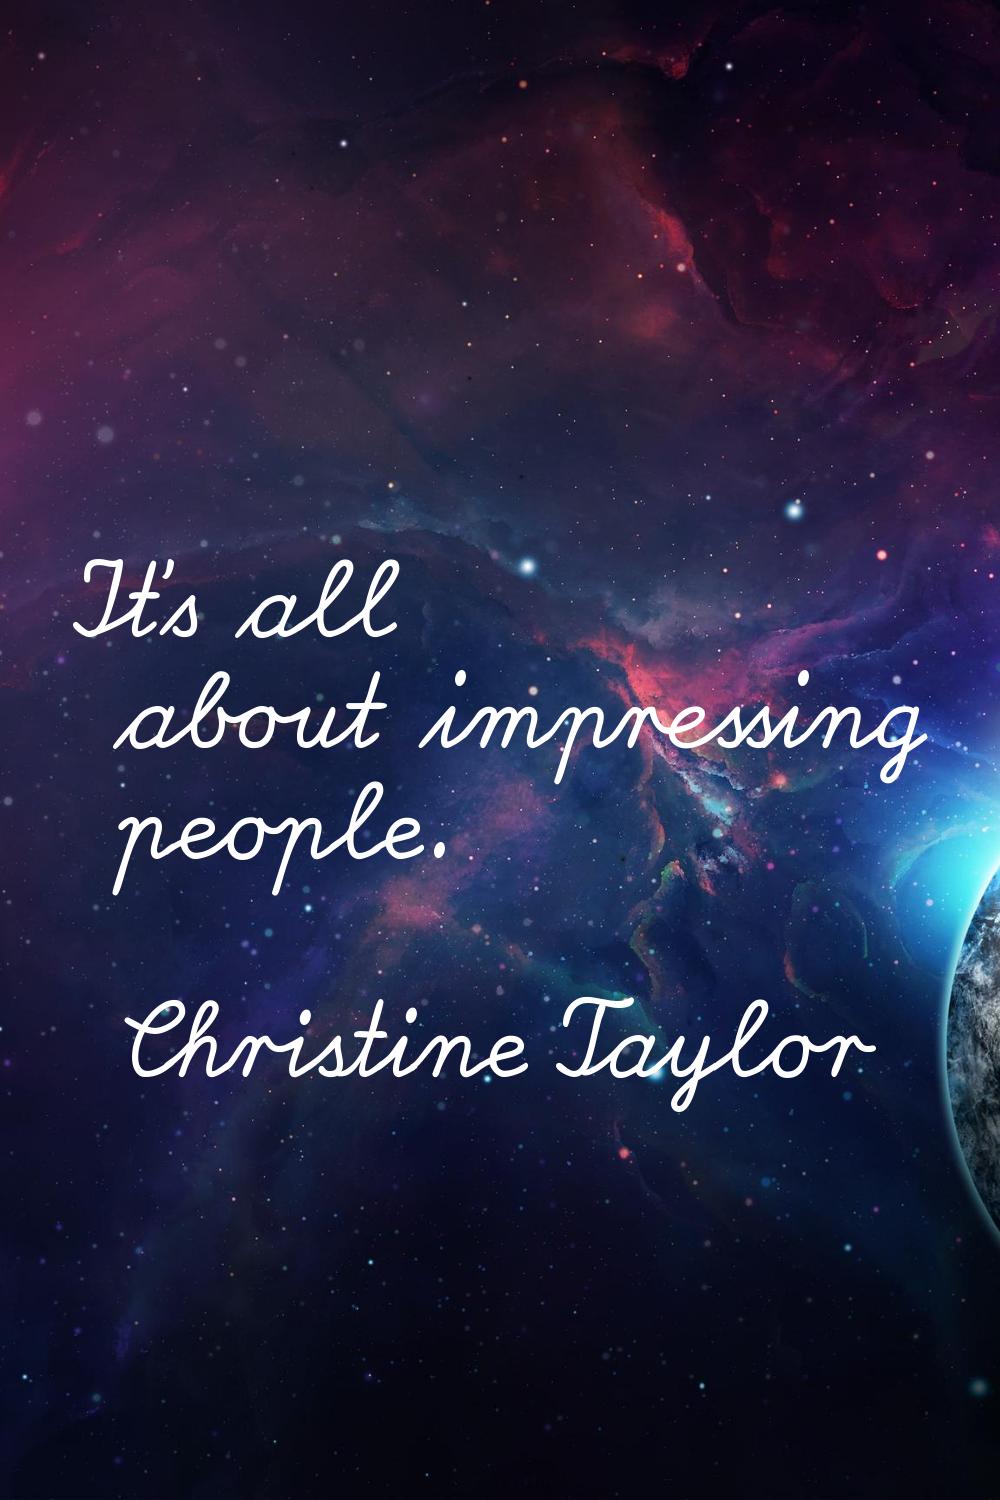 It's all about impressing people.